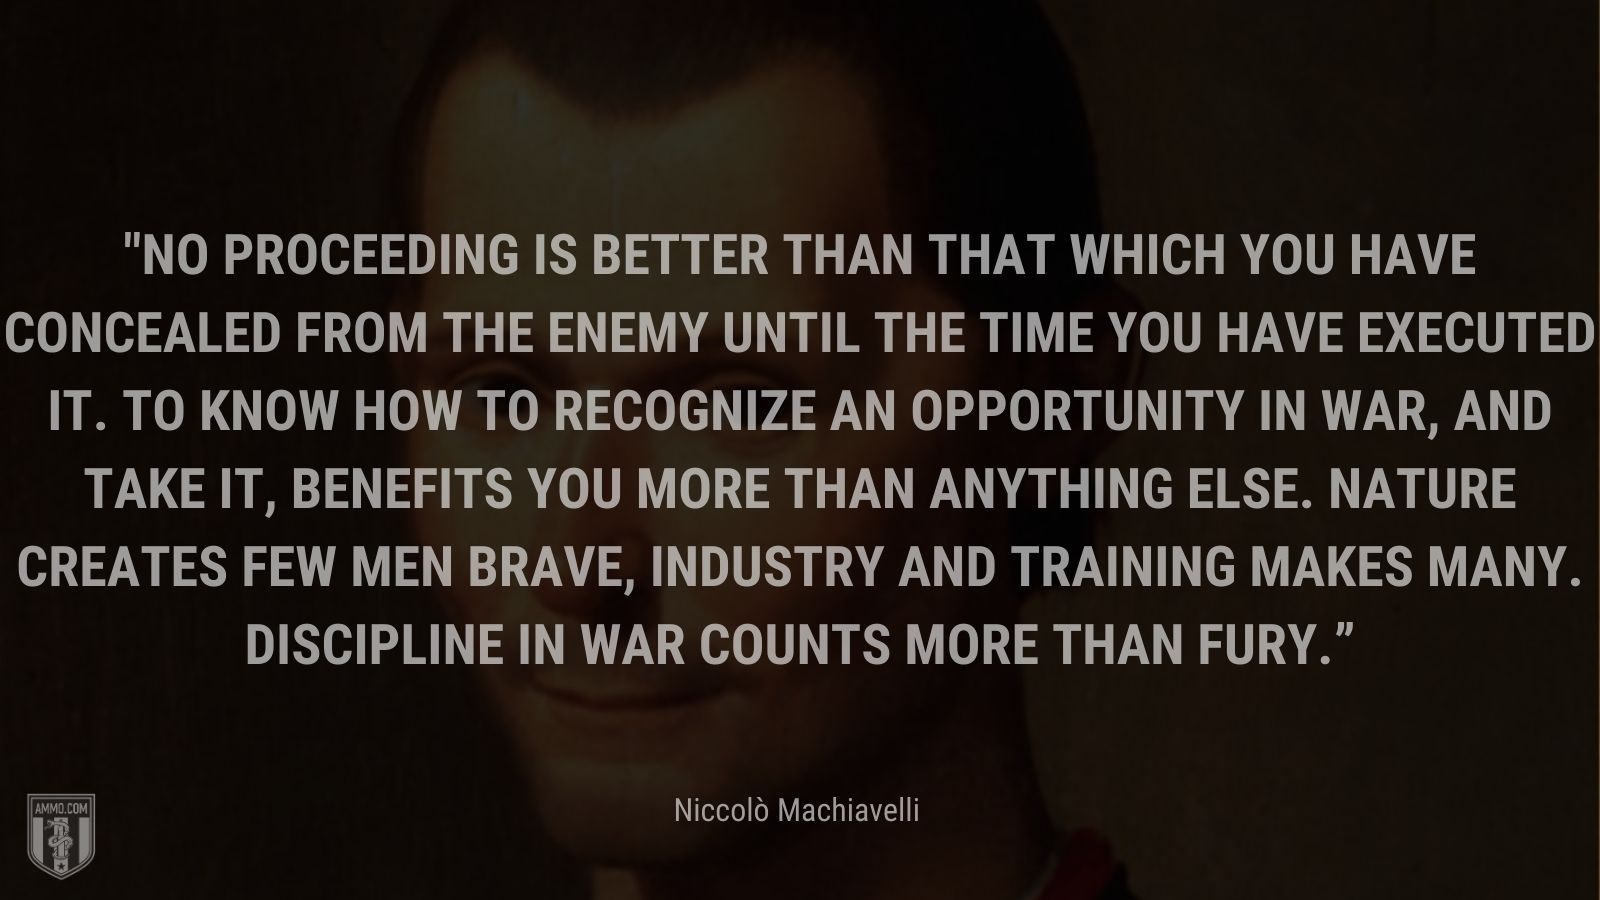 “No proceeding is better than that which you have concealed from the enemy until the time you have executed it. To know how to recognize an opportunity in war, and take it, benefits you more than anything else. Nature creates few men brave, industry and training makes many. Discipline in war counts more than fury.” - Niccolò Machiavelli